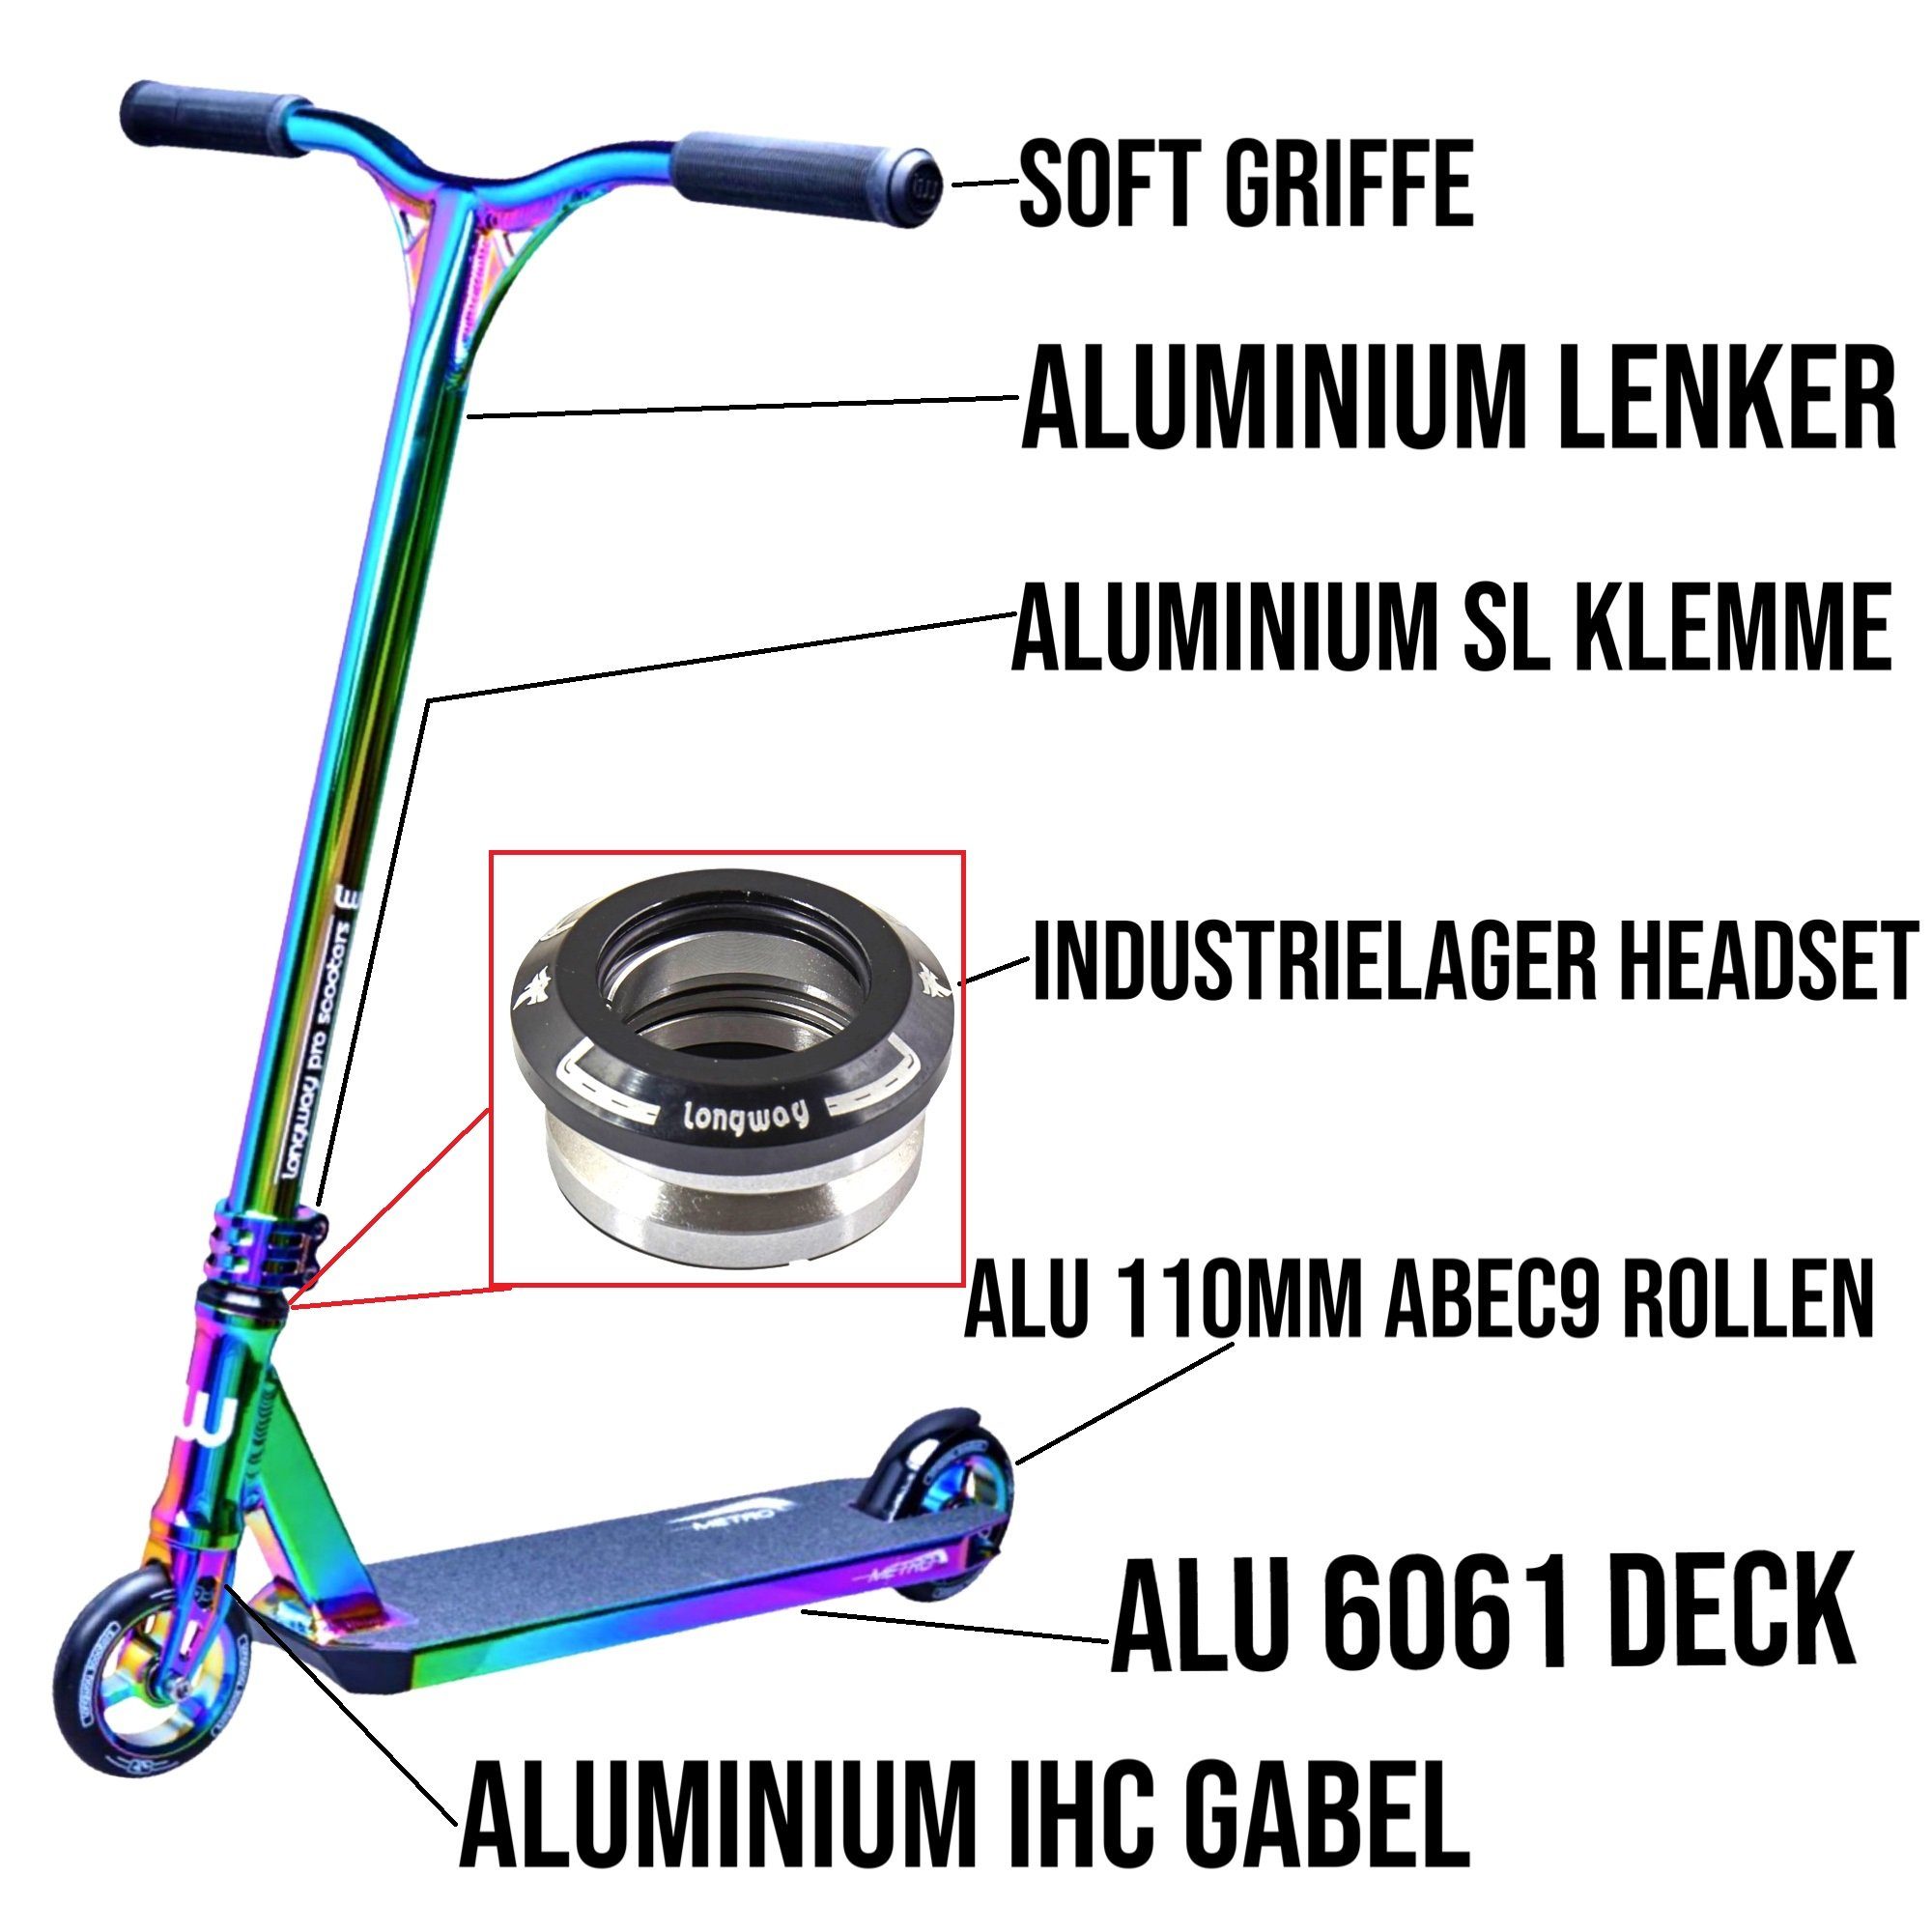 2K19 Longway Longway Stunt-Scooter Stuntscooter Scooters Metro Full Neochrom H=79cm